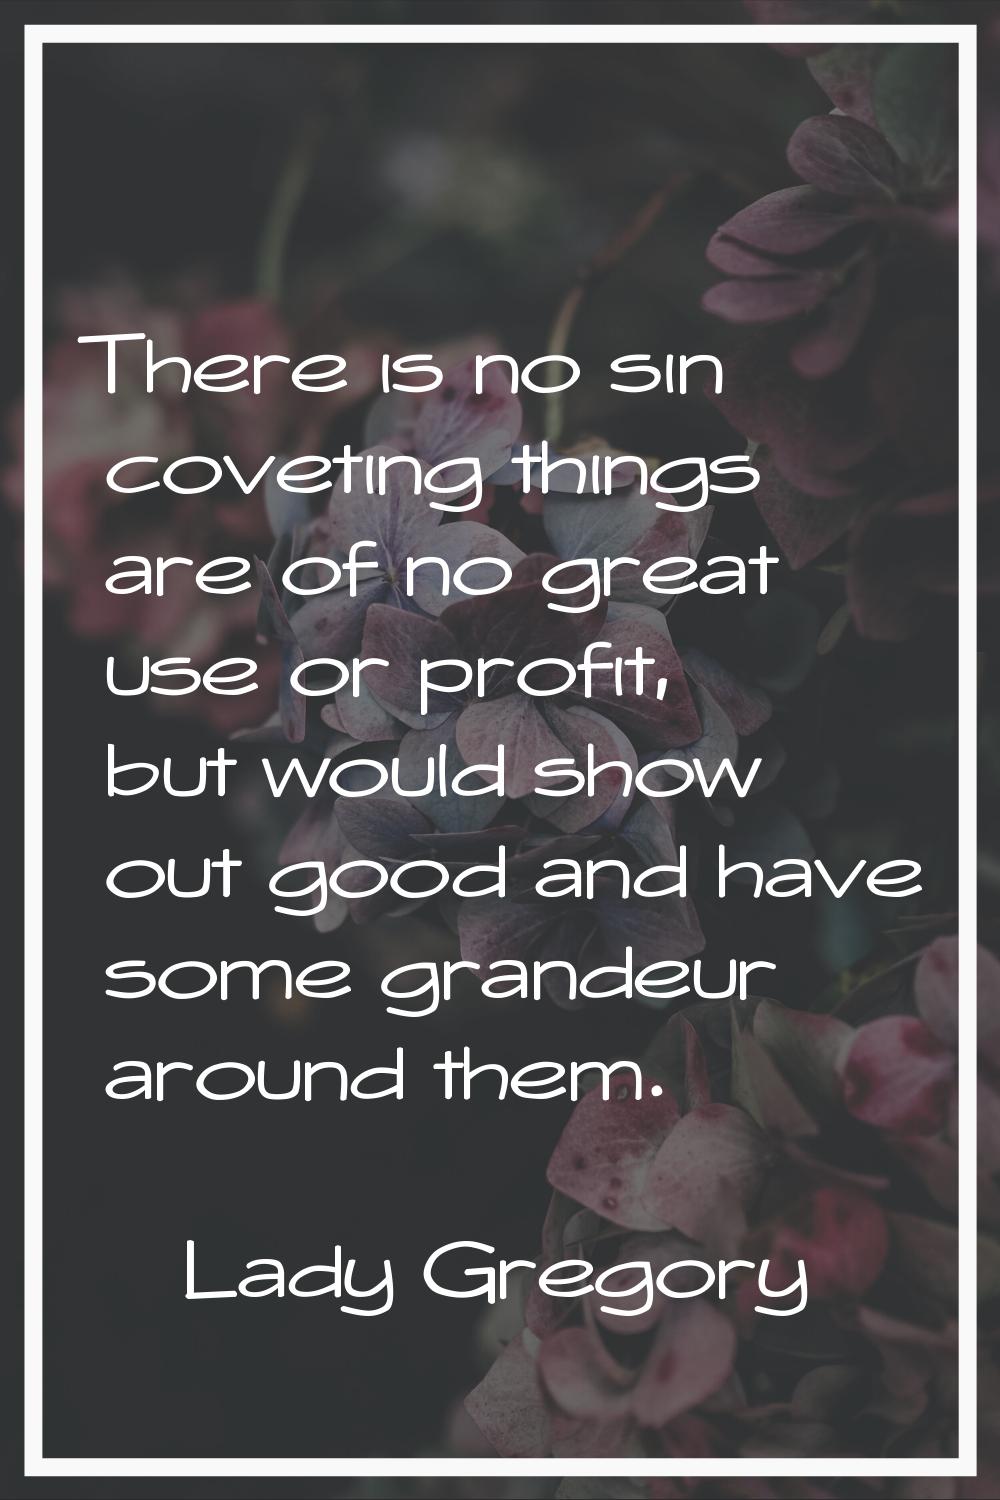 There is no sin coveting things are of no great use or profit, but would show out good and have som